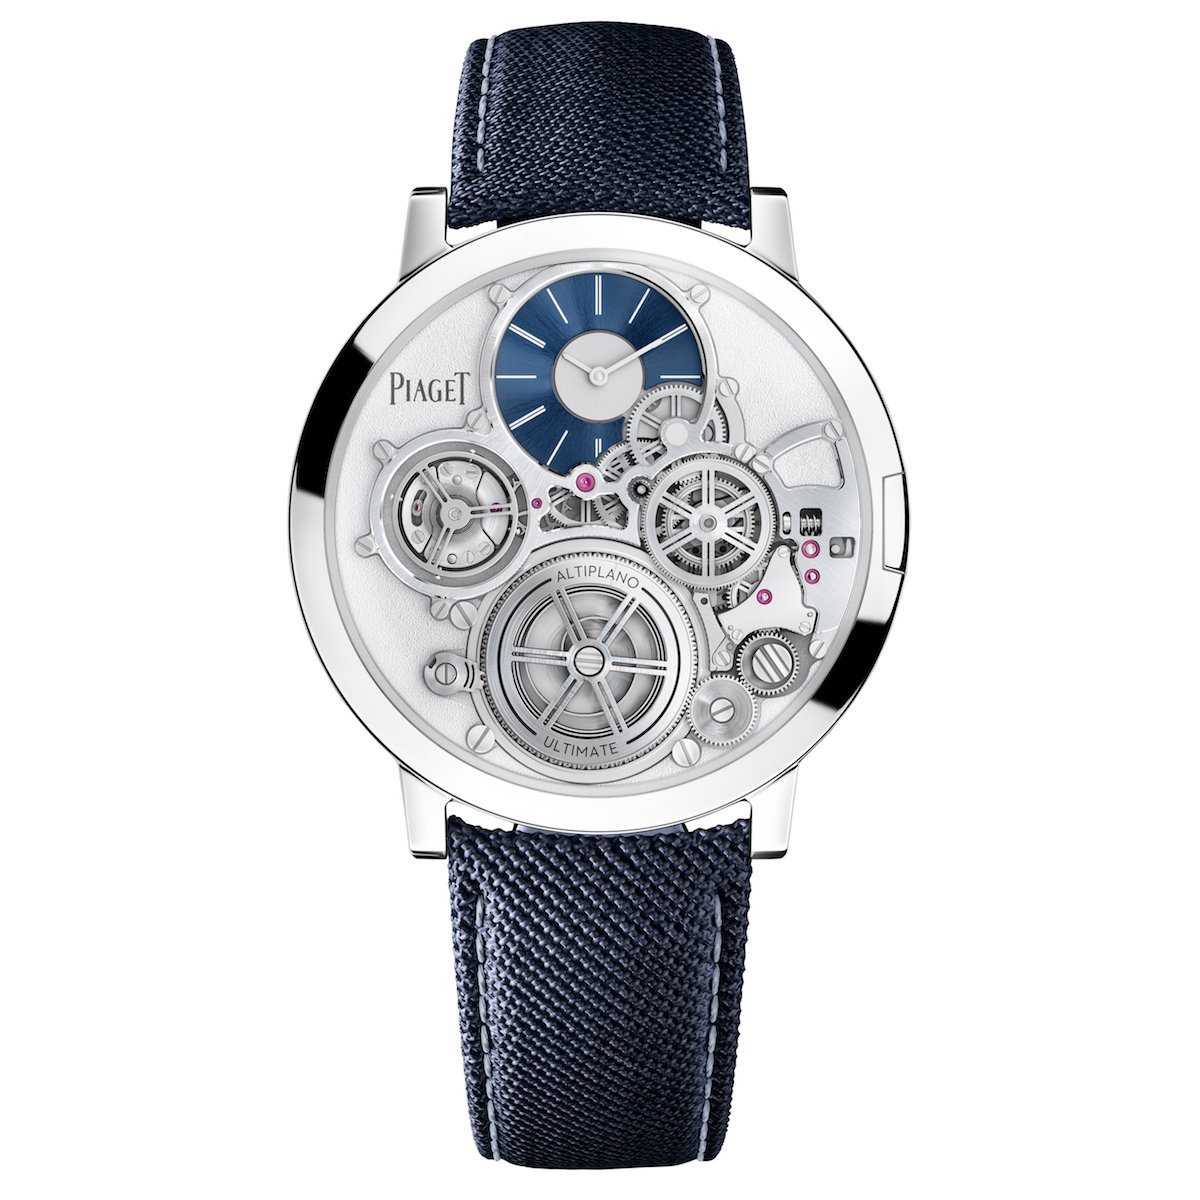 Altiplano Ultimate Concept, Piaget